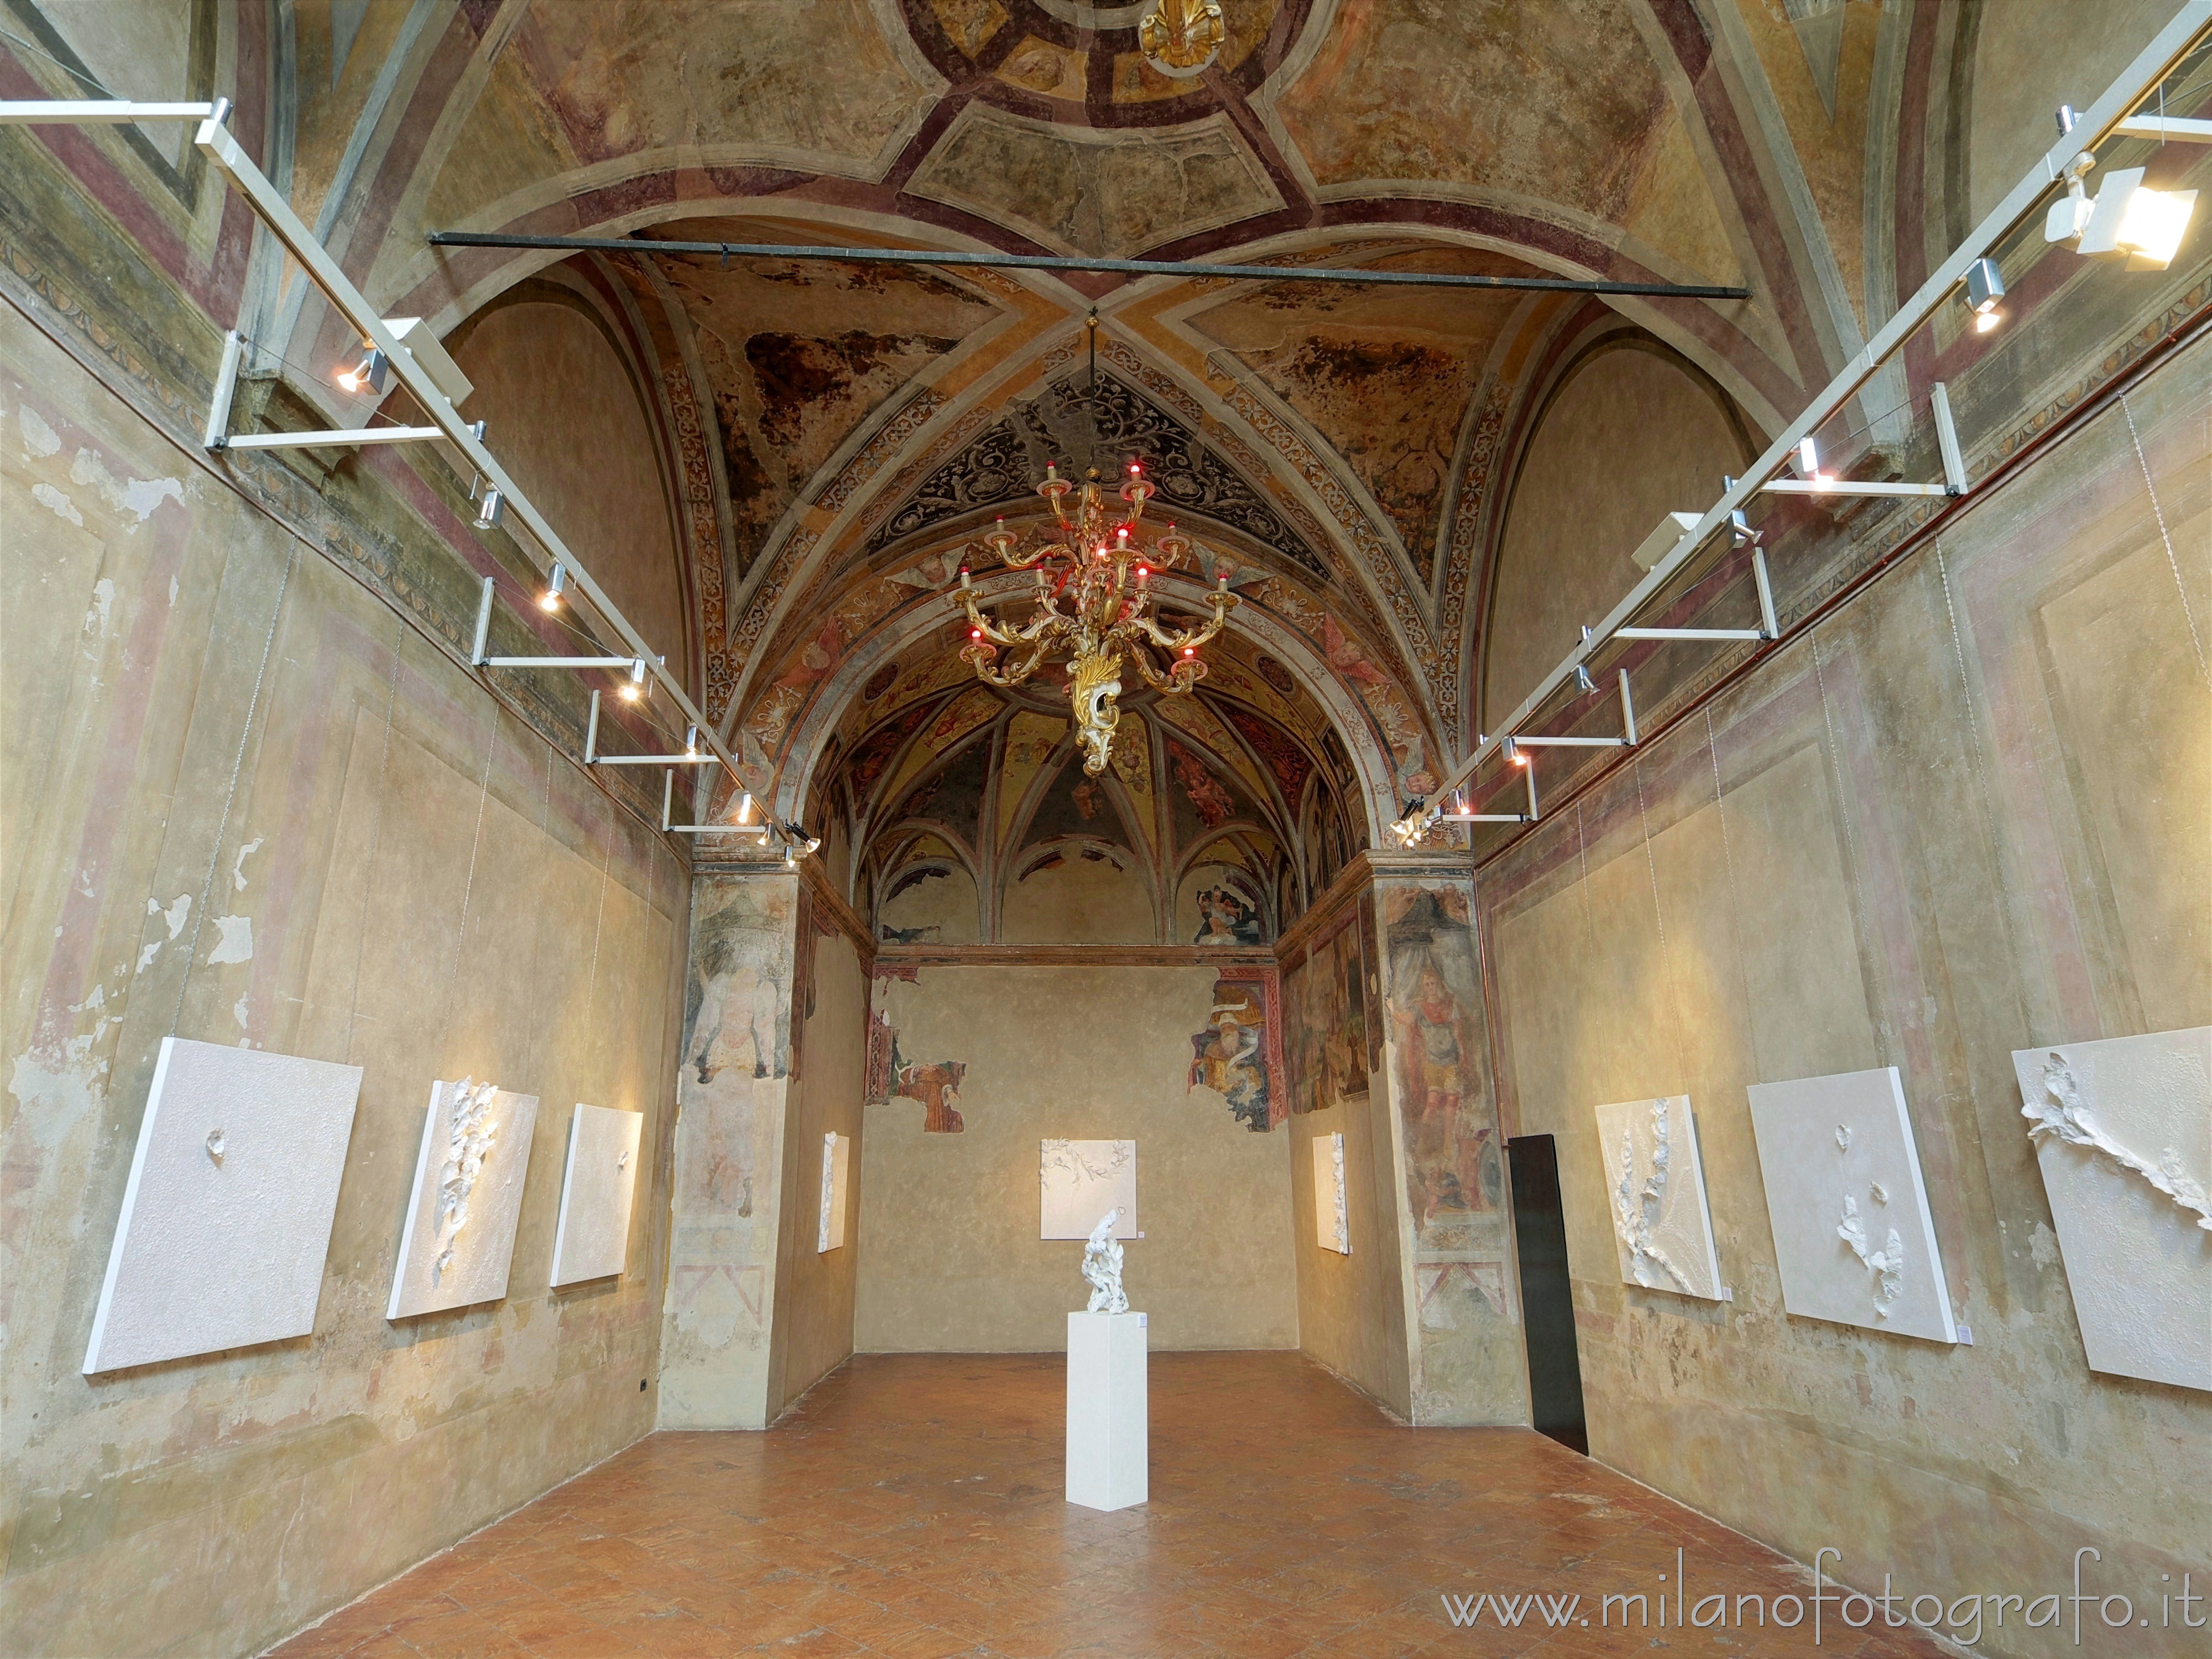 Milan (Italy): Interior of the apse of the Oratory of the Passion - Milan (Italy)